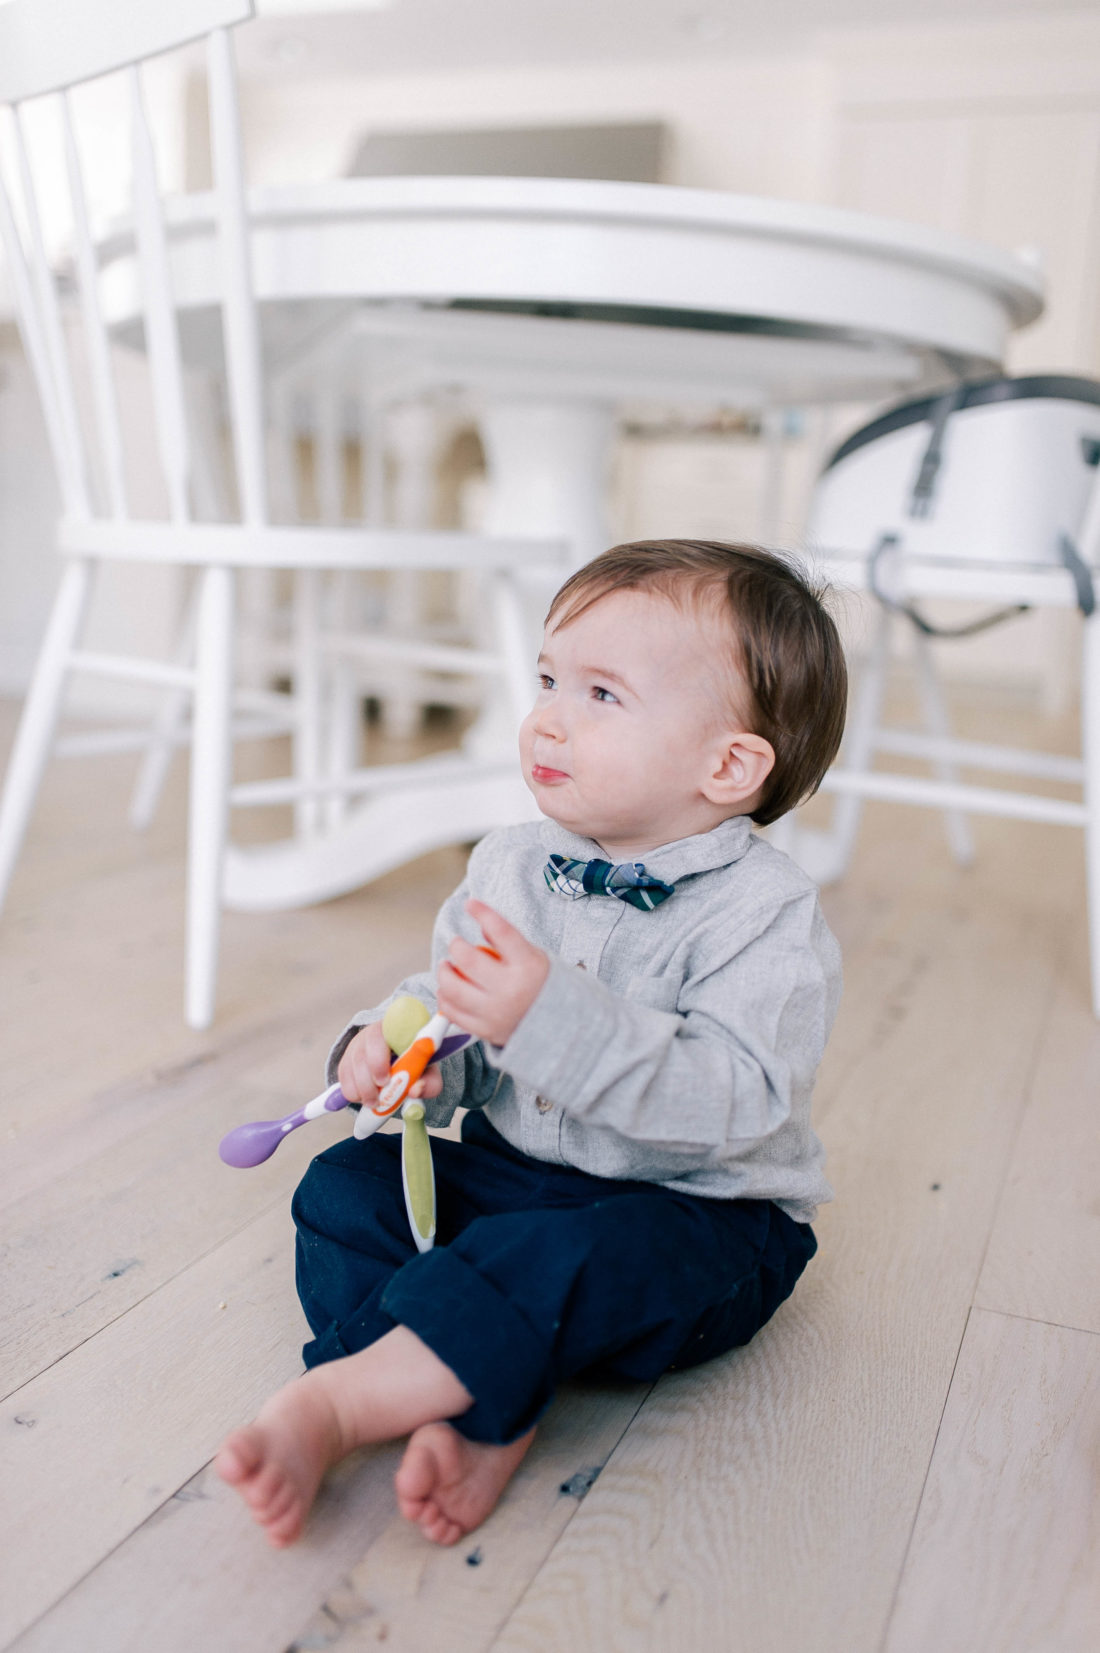 Major Martino sits on the hardwood kitchen floor in his Connecticut home and holds toddler feeding spoons